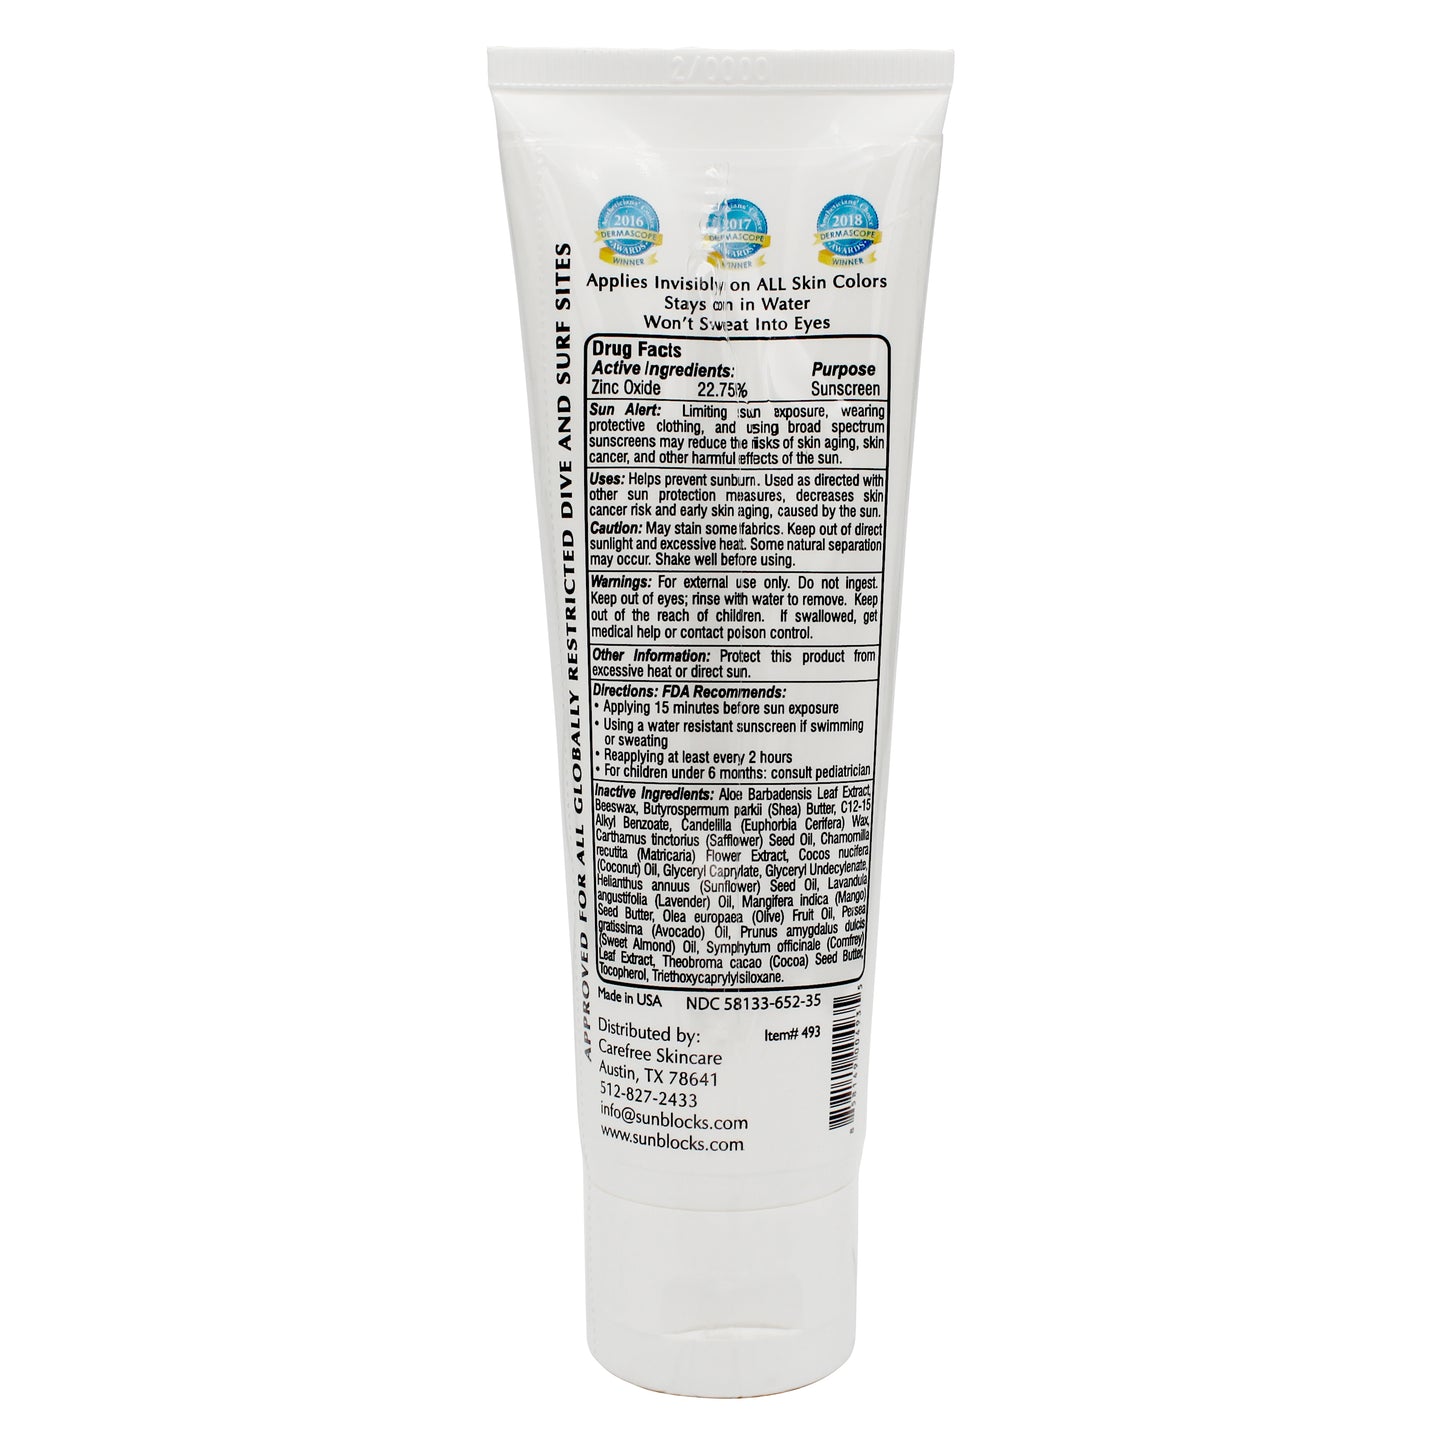 Carefree Natural SPF 30 Sunscreen Back of Tube